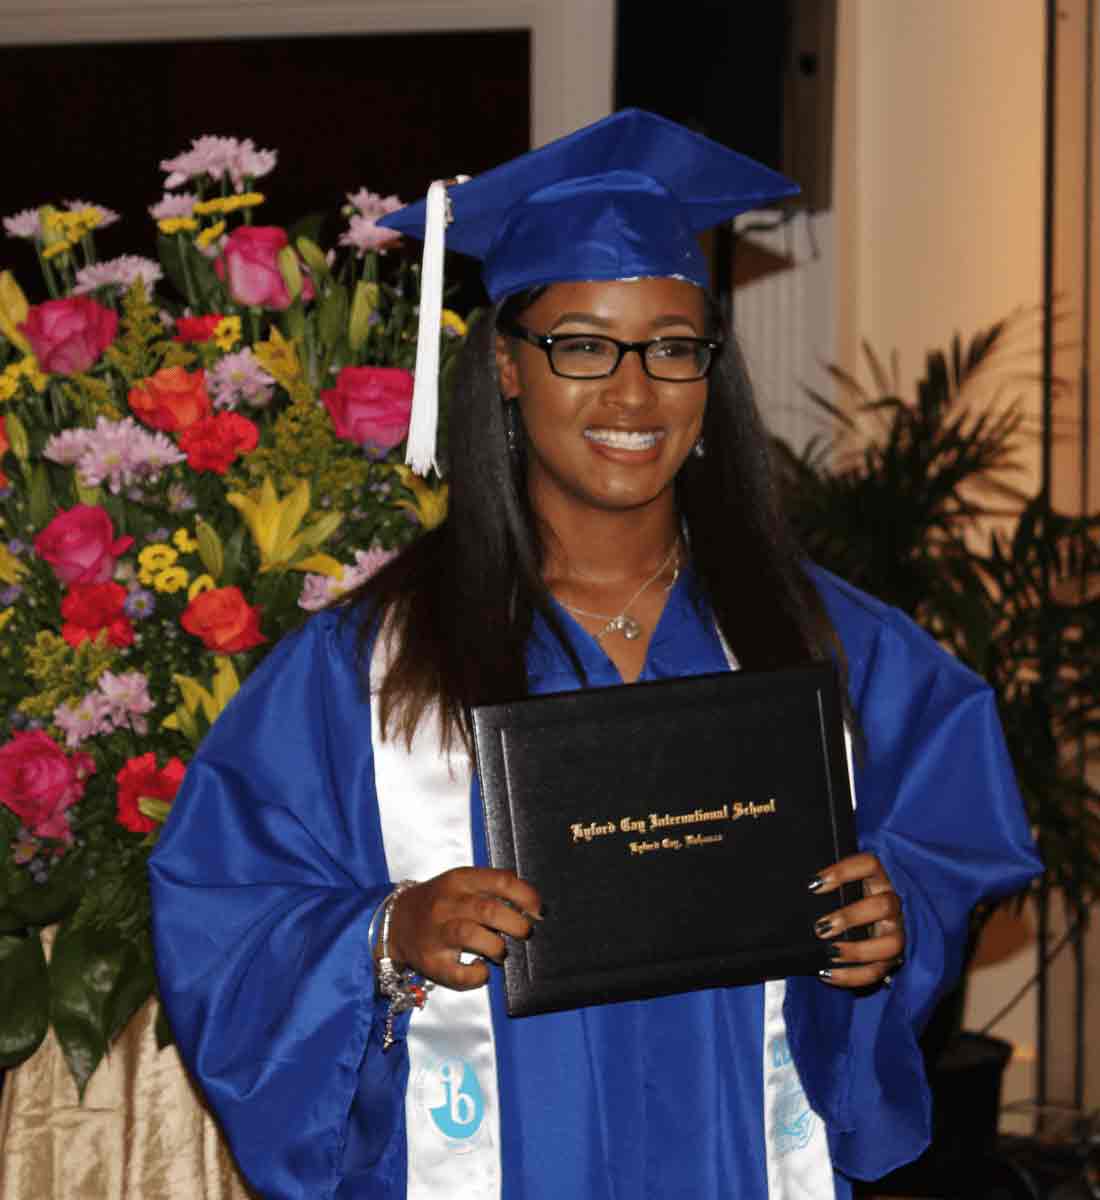 Grad in cap and gown posing and smiling with diploma